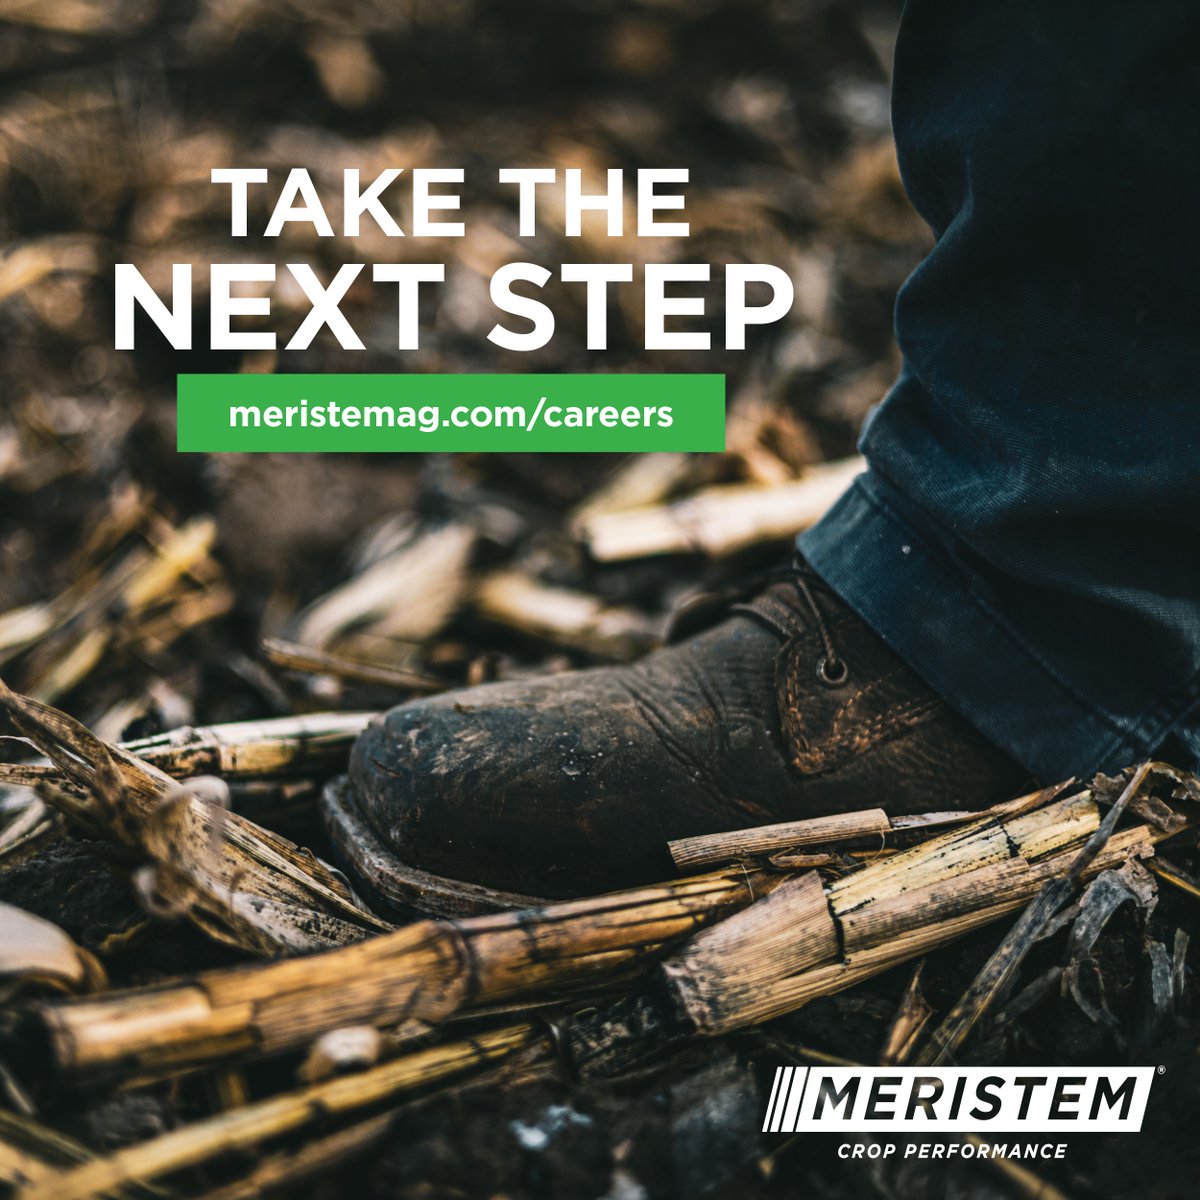 Are you passionate about bringing value to American farmers? Do you thrive in a fast-paced environment surrounded by like-minded people? Explore our various job openings and take the next step towards a more fulfilling career: meristemag.com/careers/